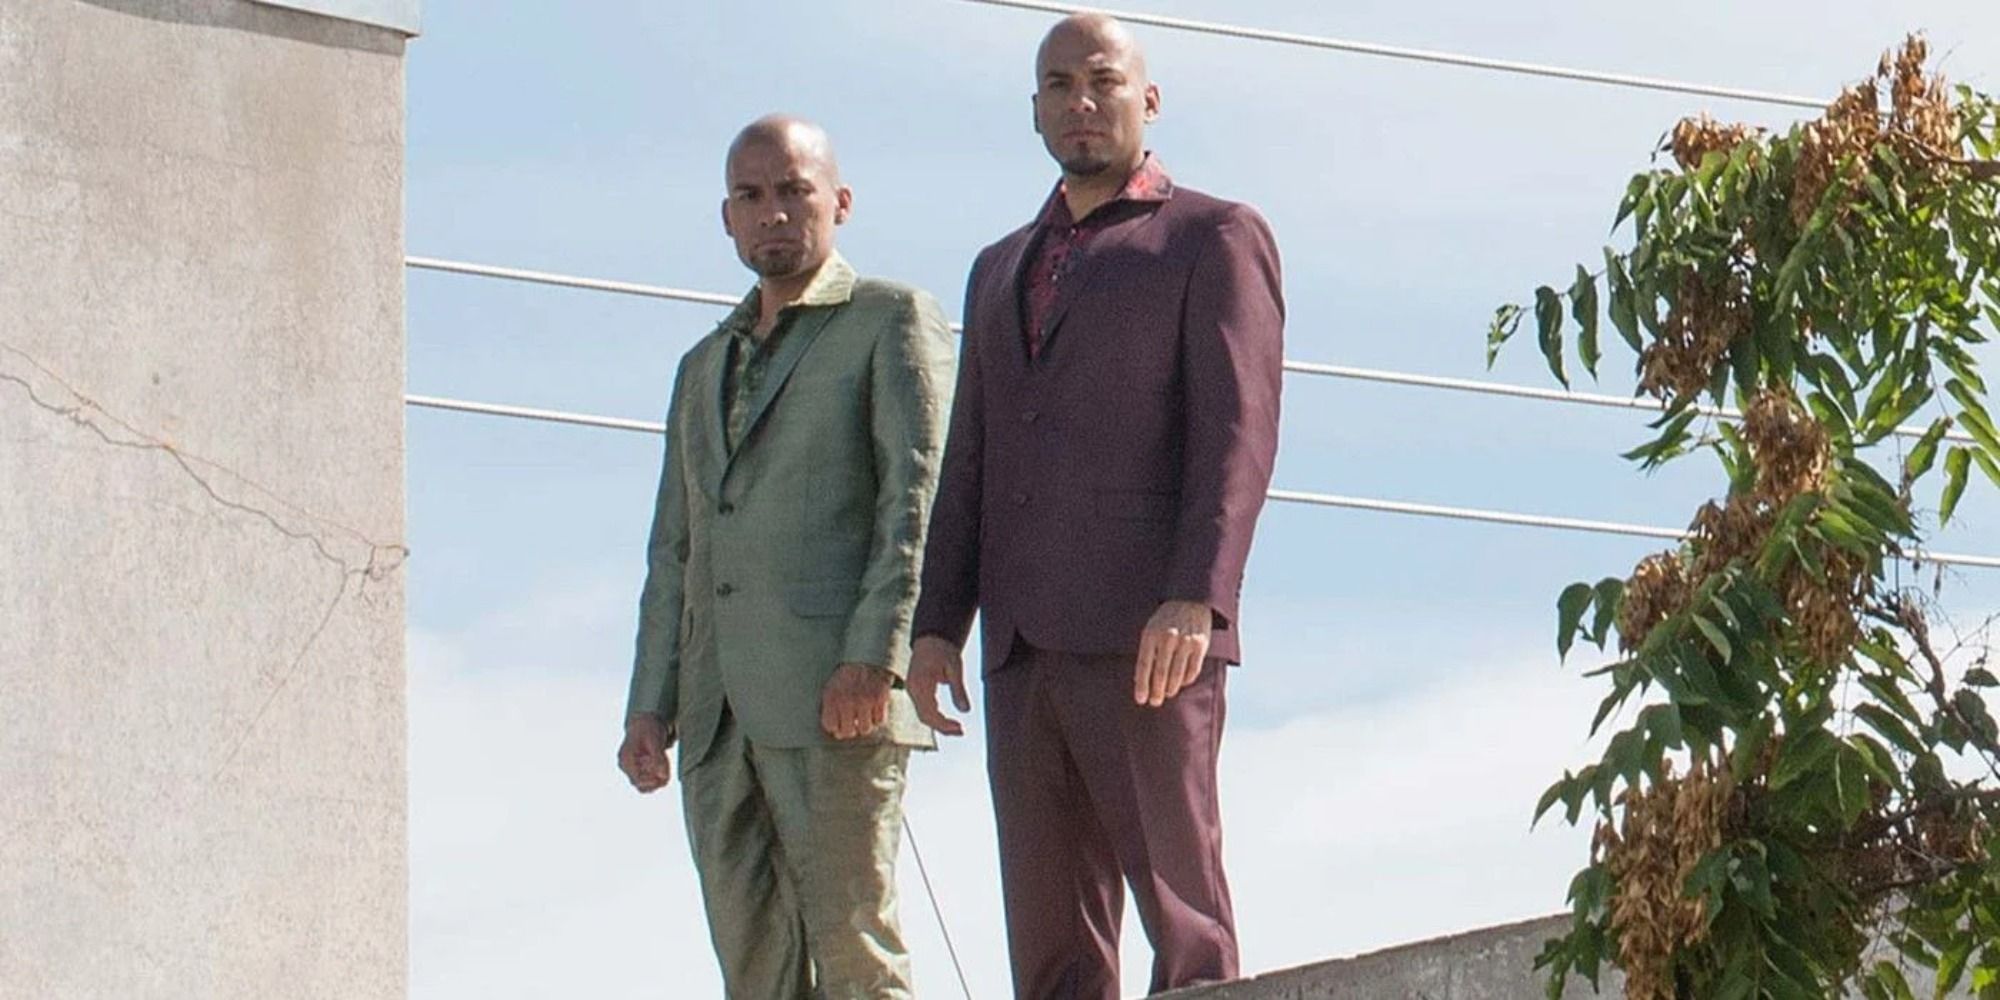 Marco and Leonel Salamanca standing on a roof in Better Call Saul